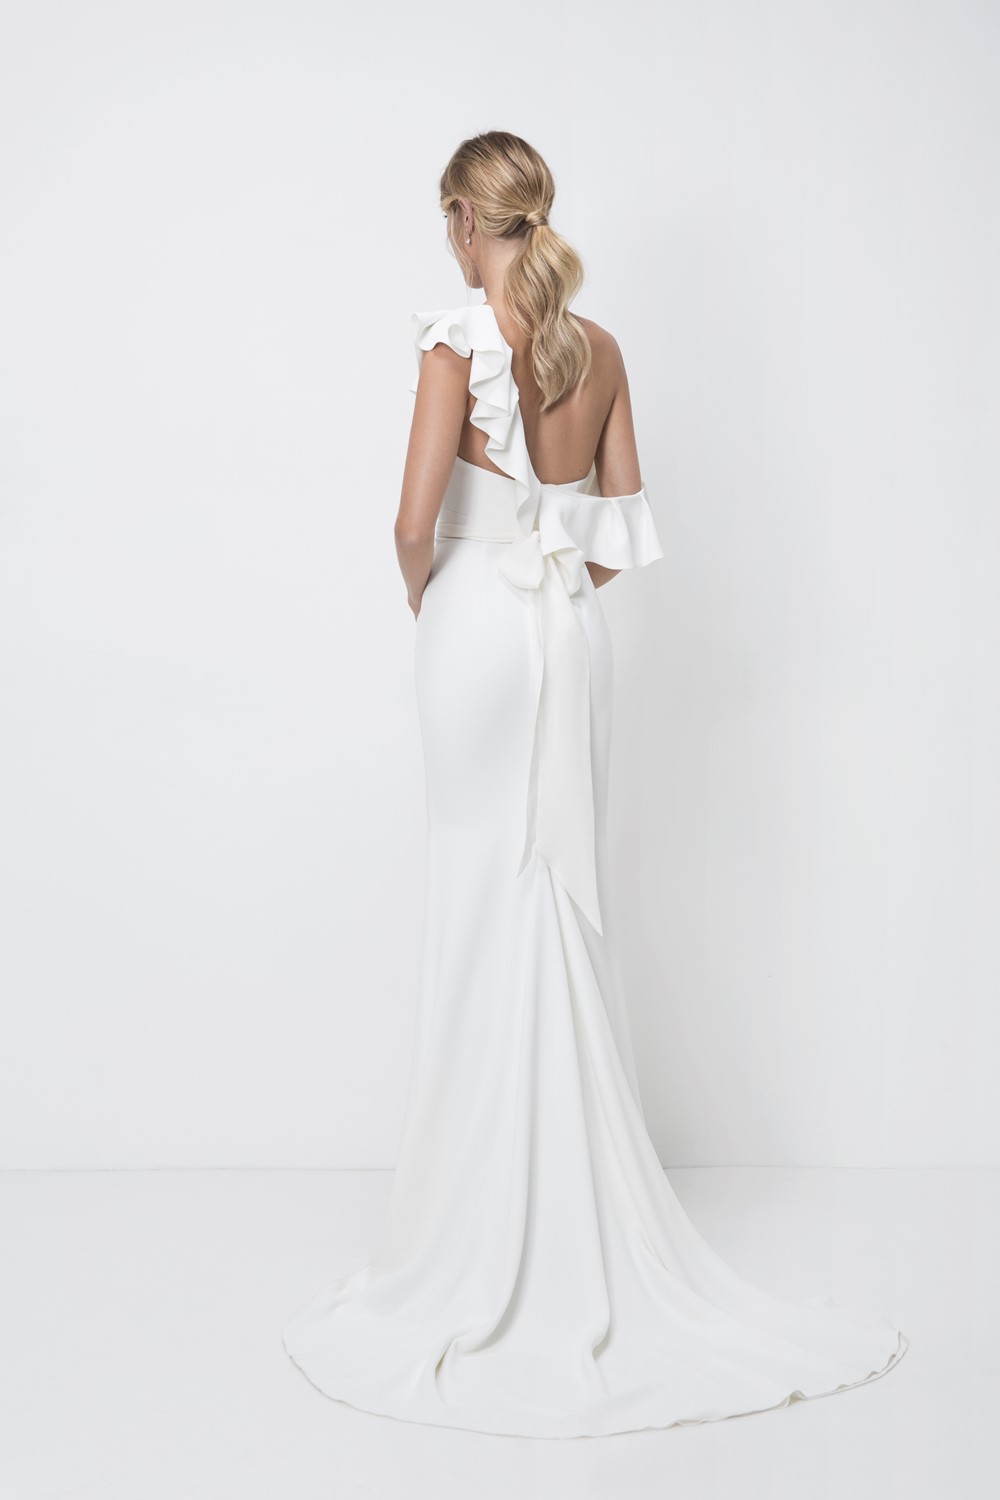 Stella Wedding Dress from Lihi Hod's 2018 Bridal Collection